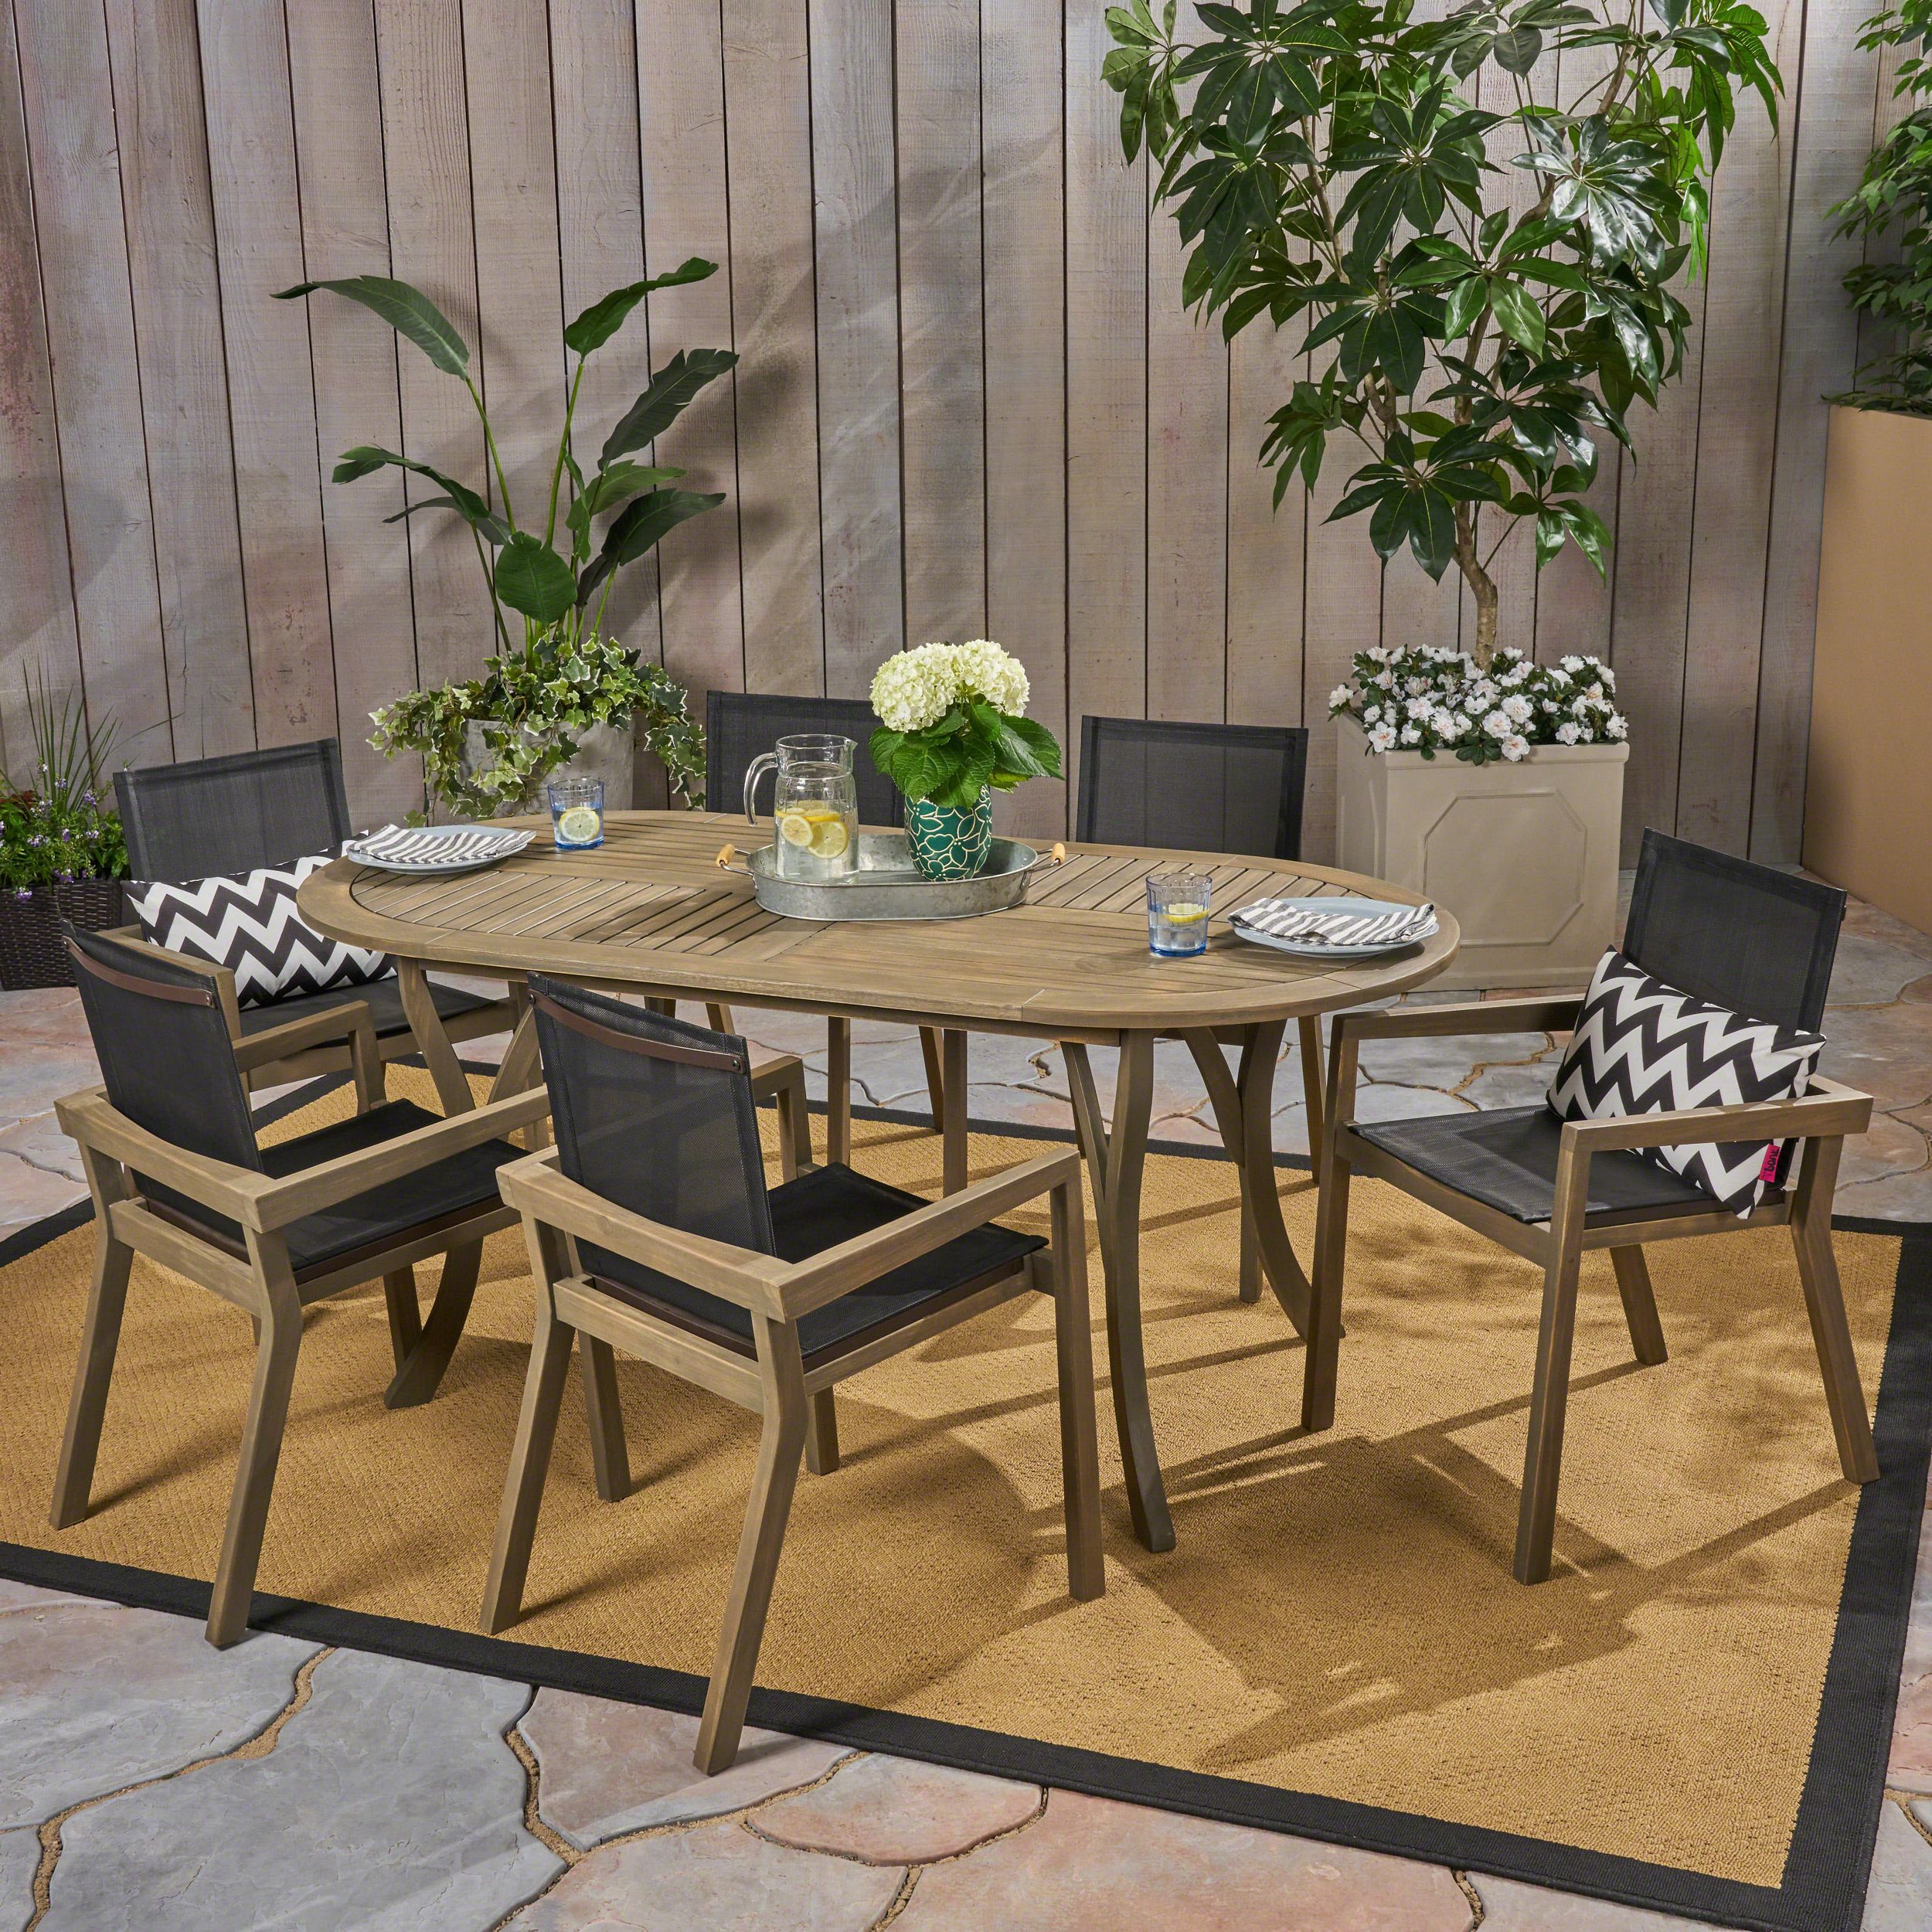 Oval 7 Piece Outdoor Patio Dining Sets Throughout Current Kalani Outdoor 7 Piece Acacia Wood And Mesh Oval Dining Set, Gray (View 5 of 15)